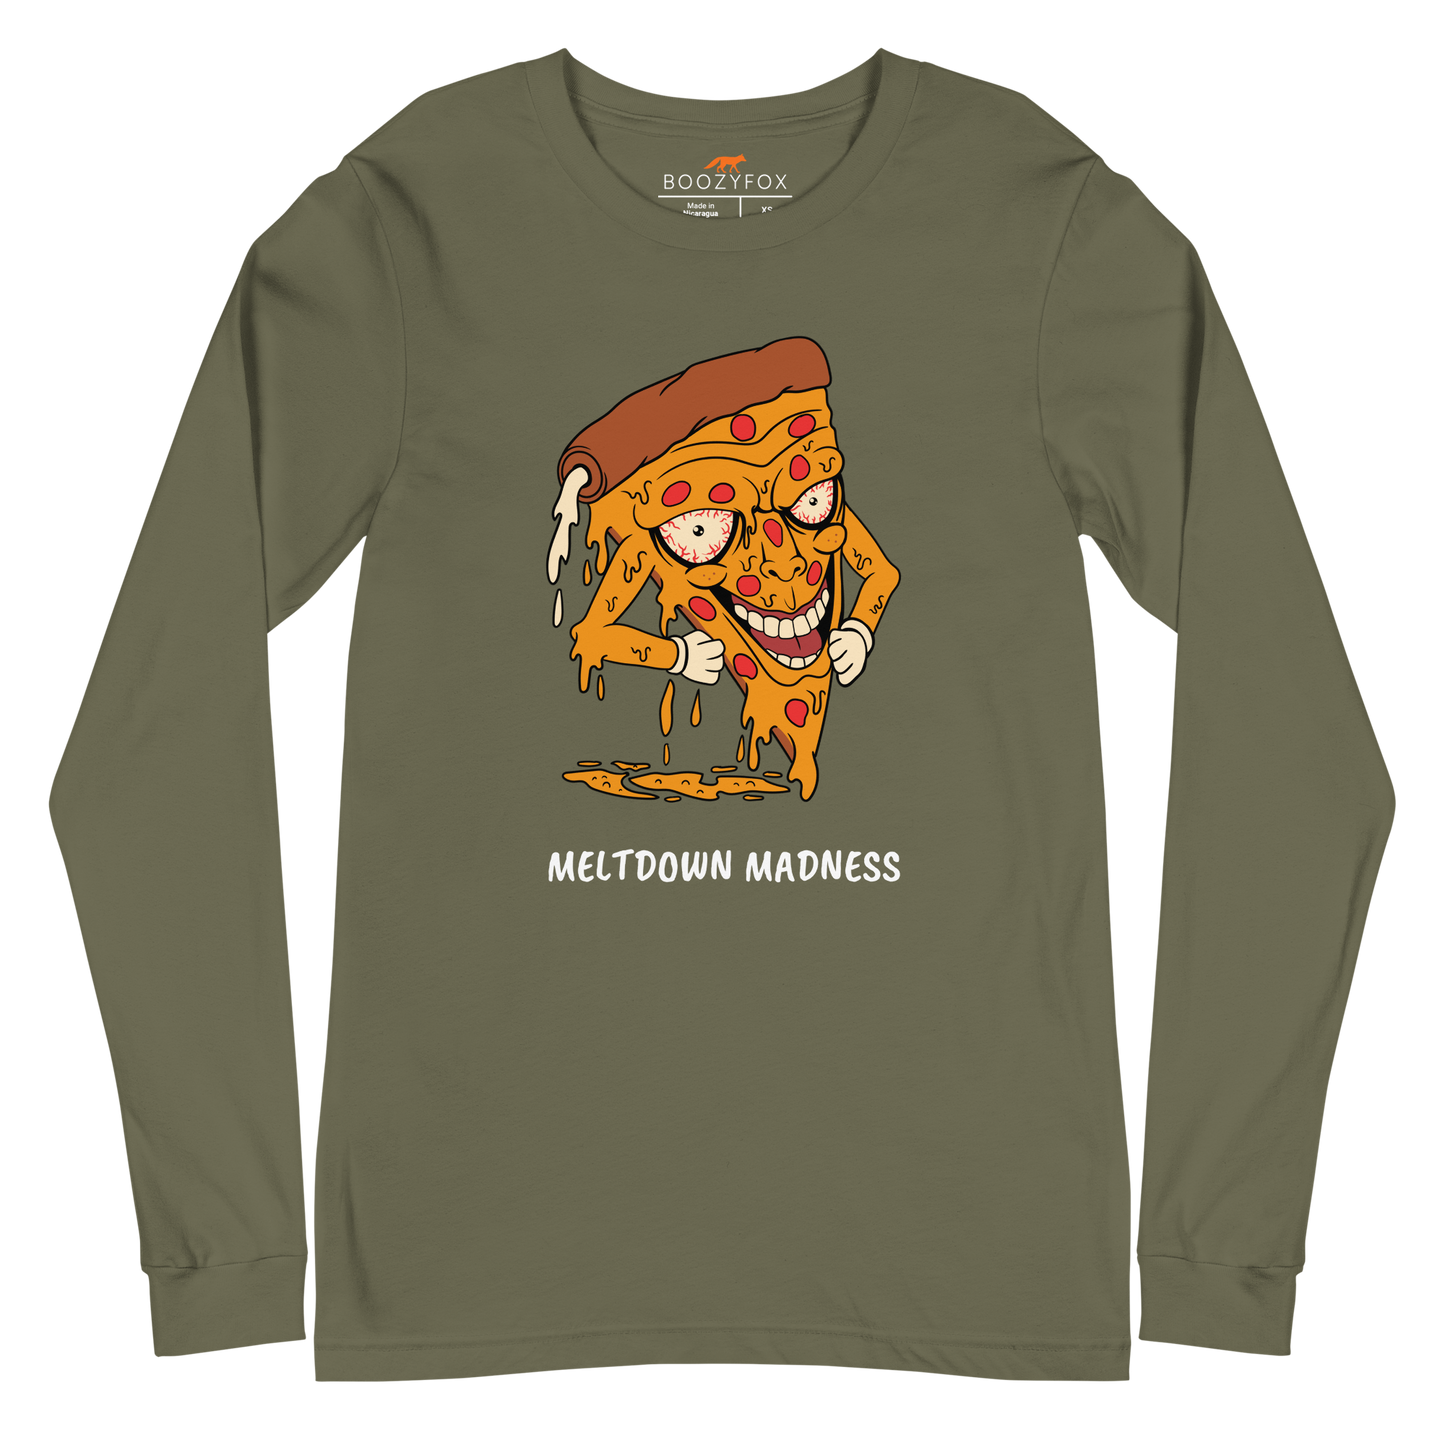 Military Green Melting Pizza Long Sleeve Tee featuring a Meltdown Madness graphic on the chest - Funny Pizza Long Sleeve Graphic Tees - Boozy Fox